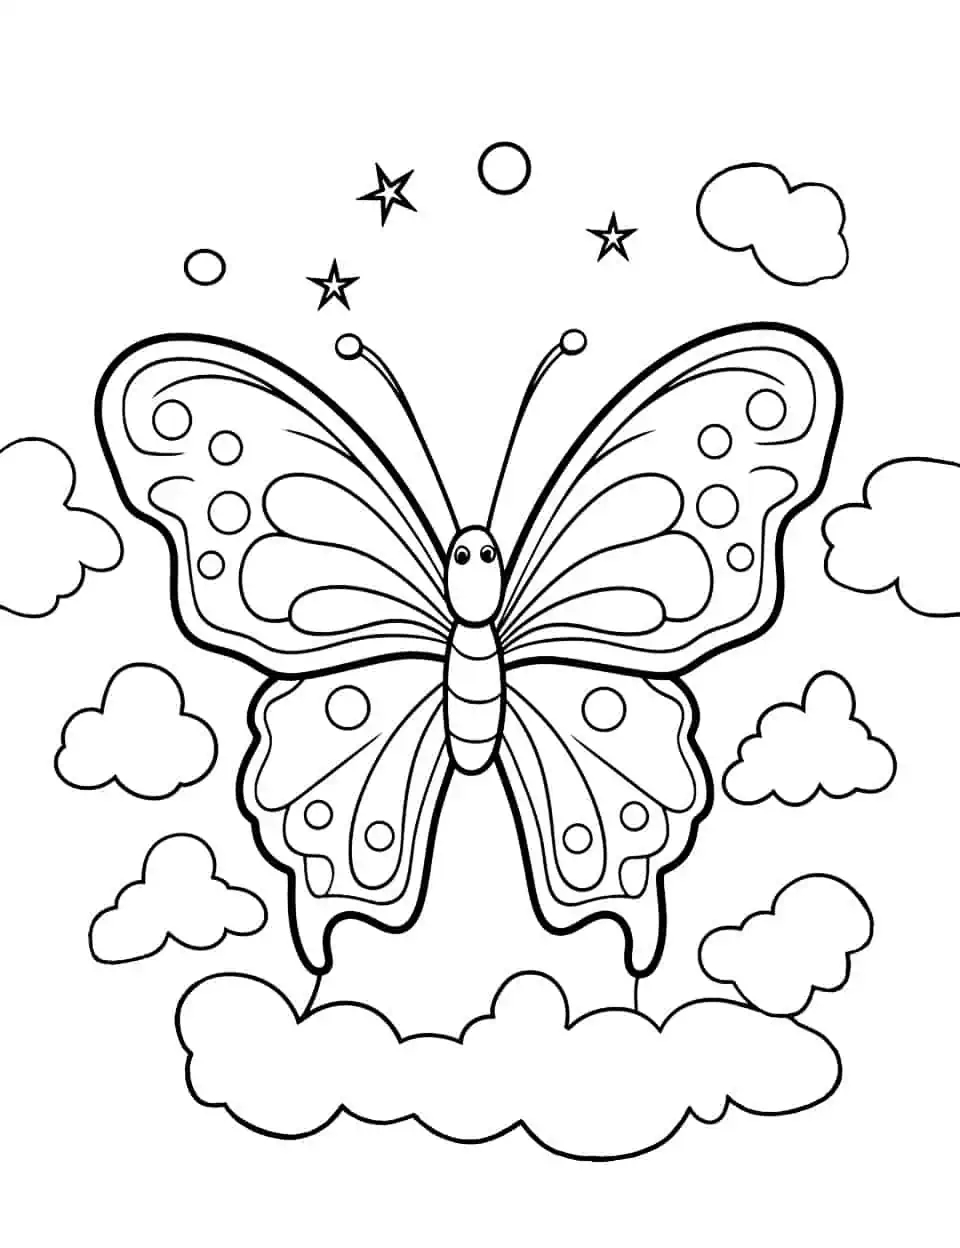 Butterfly Dreams Coloring Page - A dreamy coloring page depicting a butterfly amidst clouds and sparkling stars.